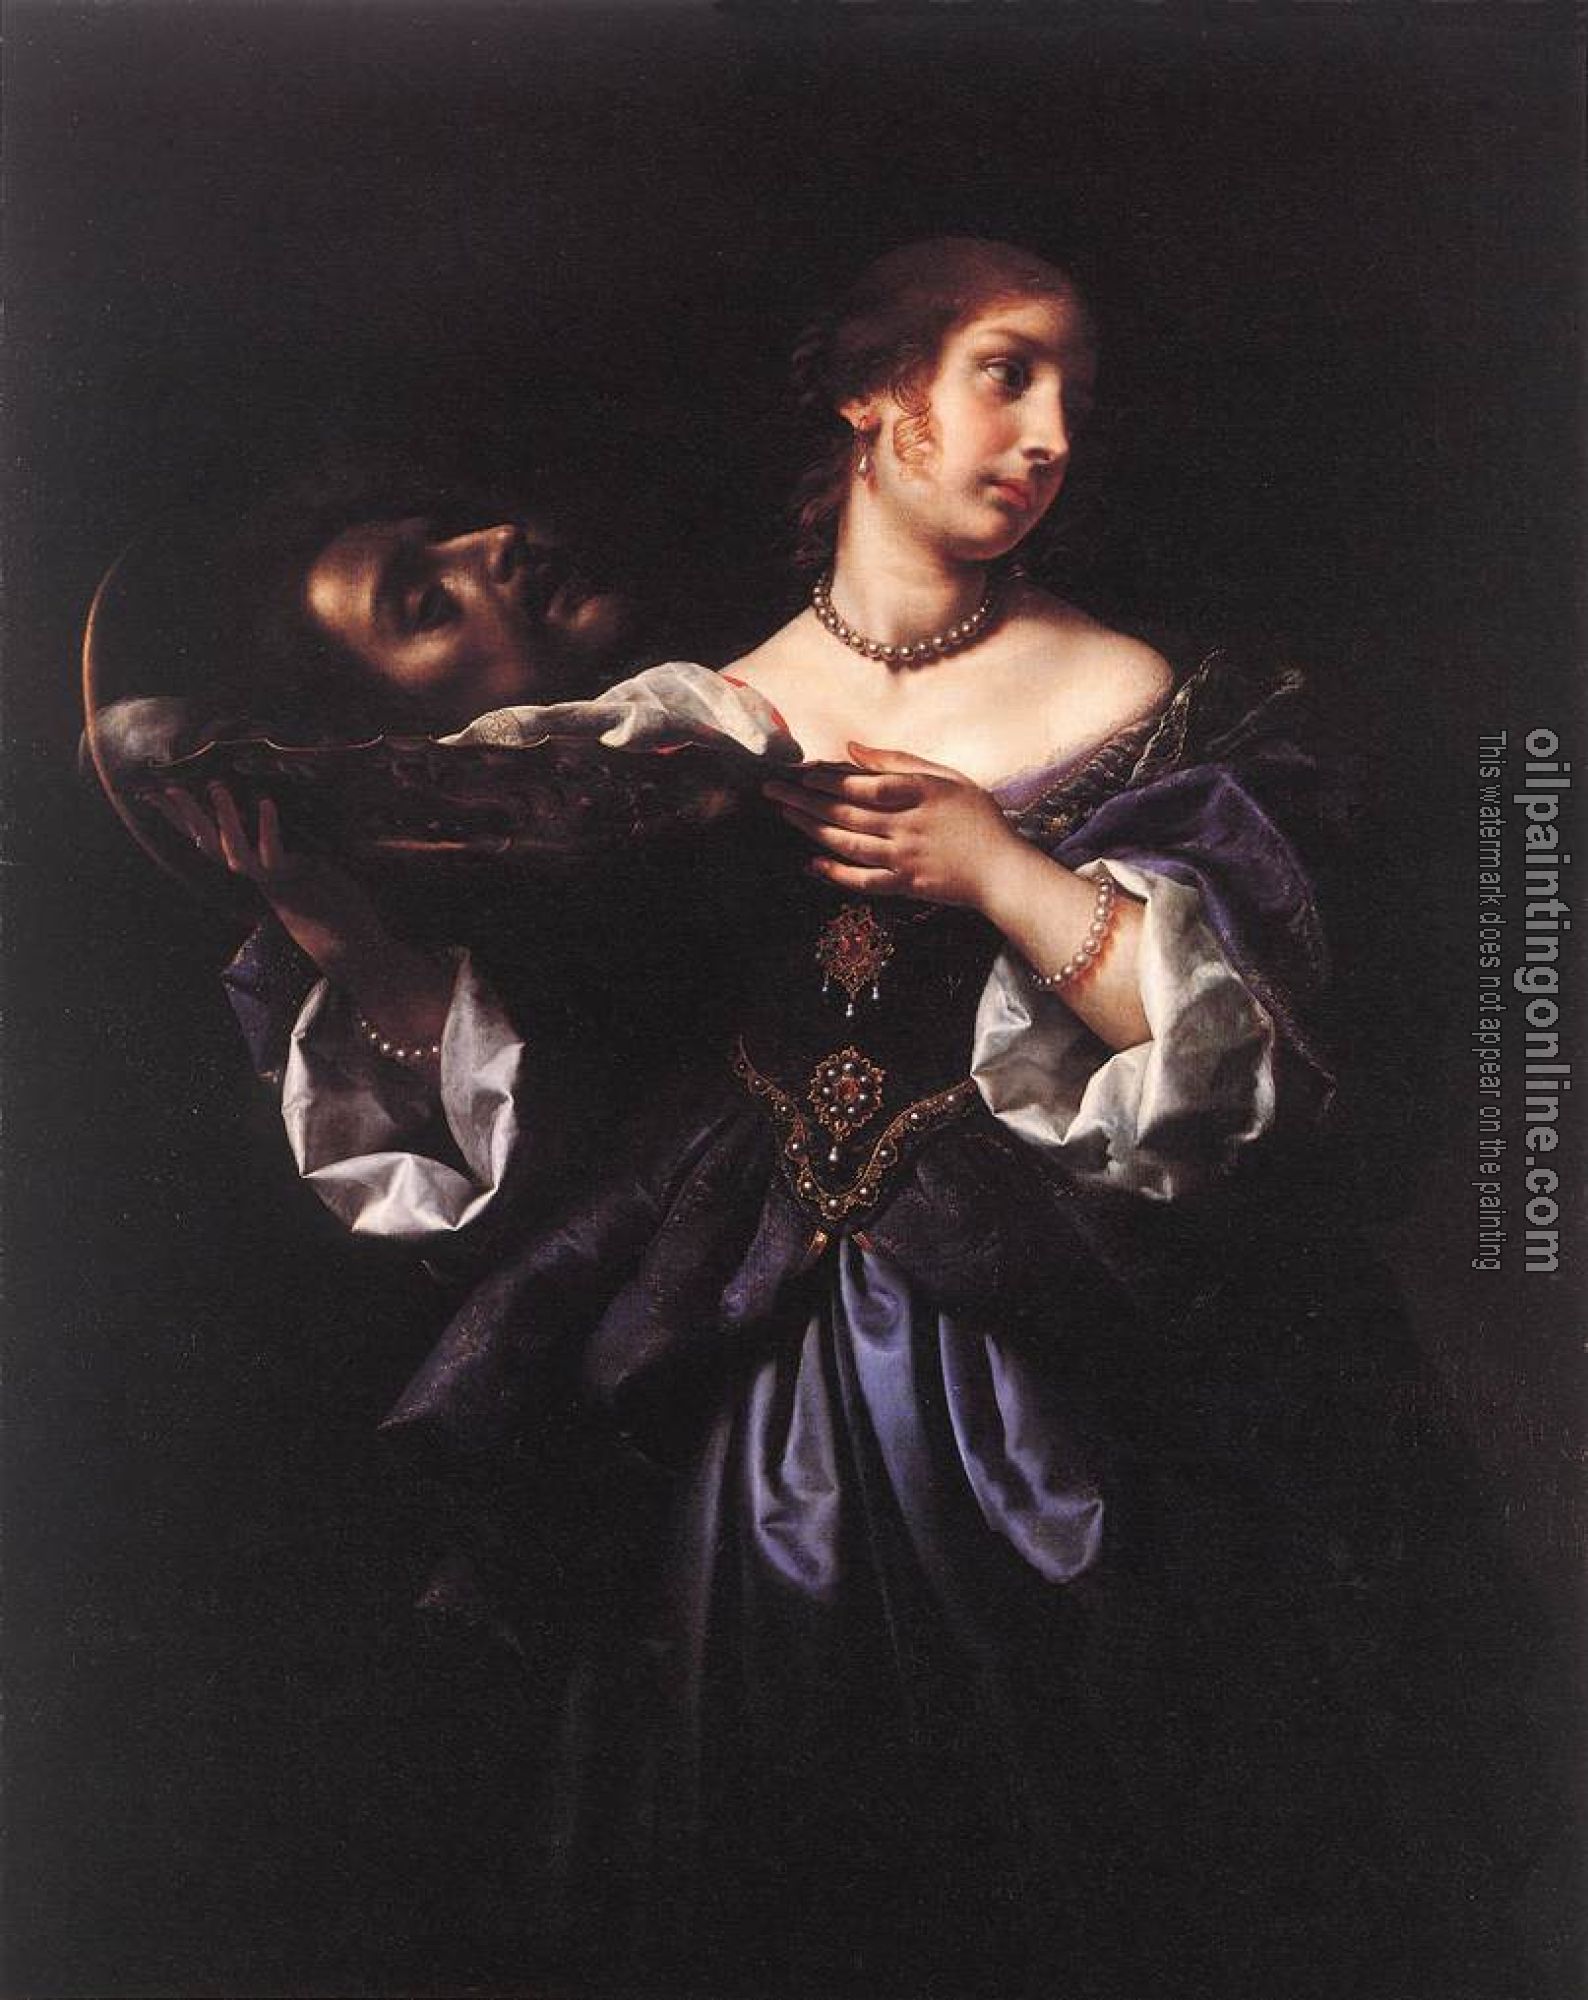 Carlo Dolci - Salome with the Head of St John the Baptist